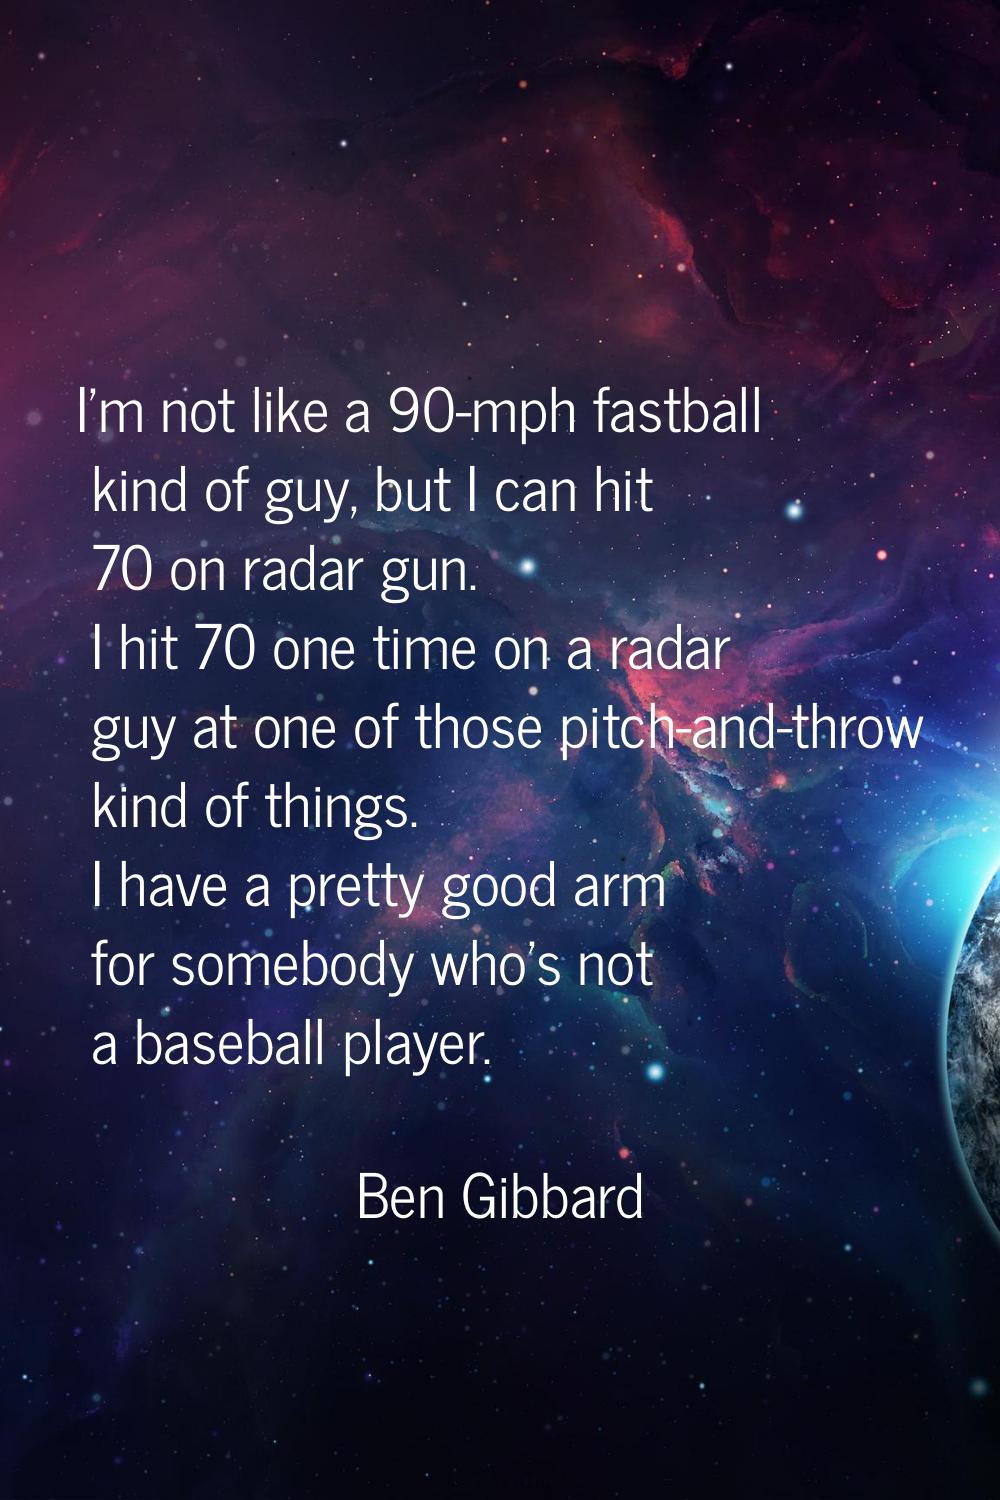 I'm not like a 90-mph fastball kind of guy, but I can hit 70 on radar gun. I hit 70 one time on a r